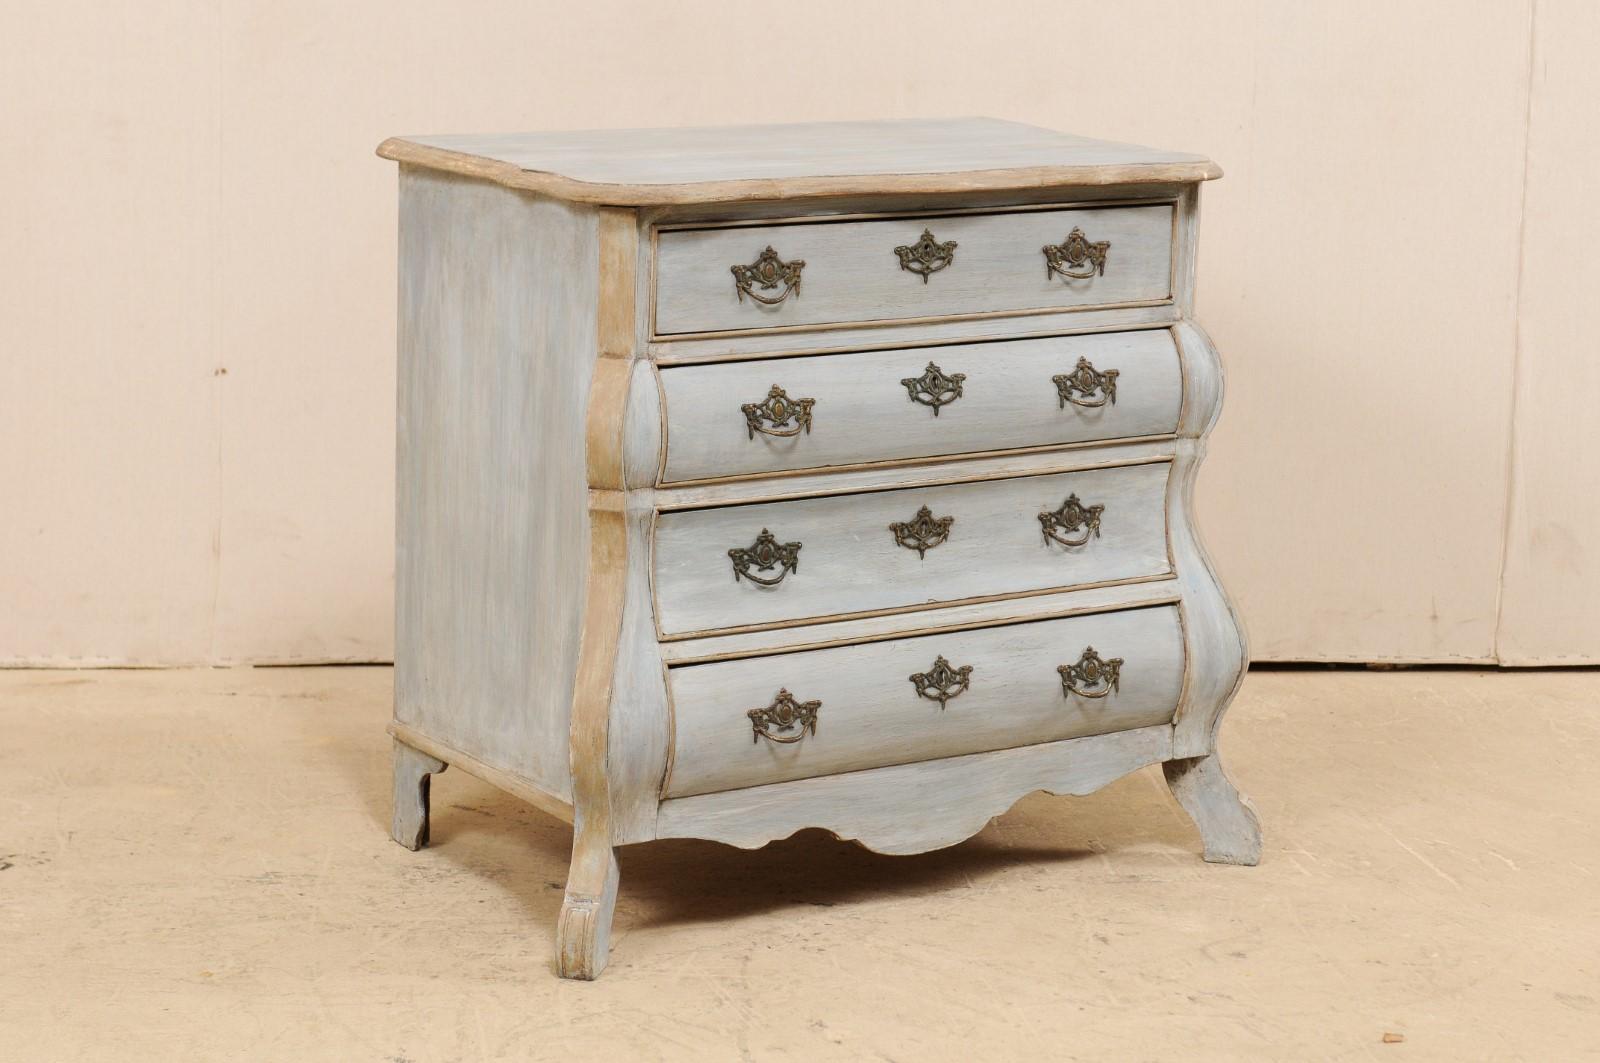 A Dutch bombé front painted wood chest of drawers from the early 20th century. This antique chest from the Netherlands features a Classic Dutch style with the shapely top resting above the serpentine front with exaggerated side posts, and fitted